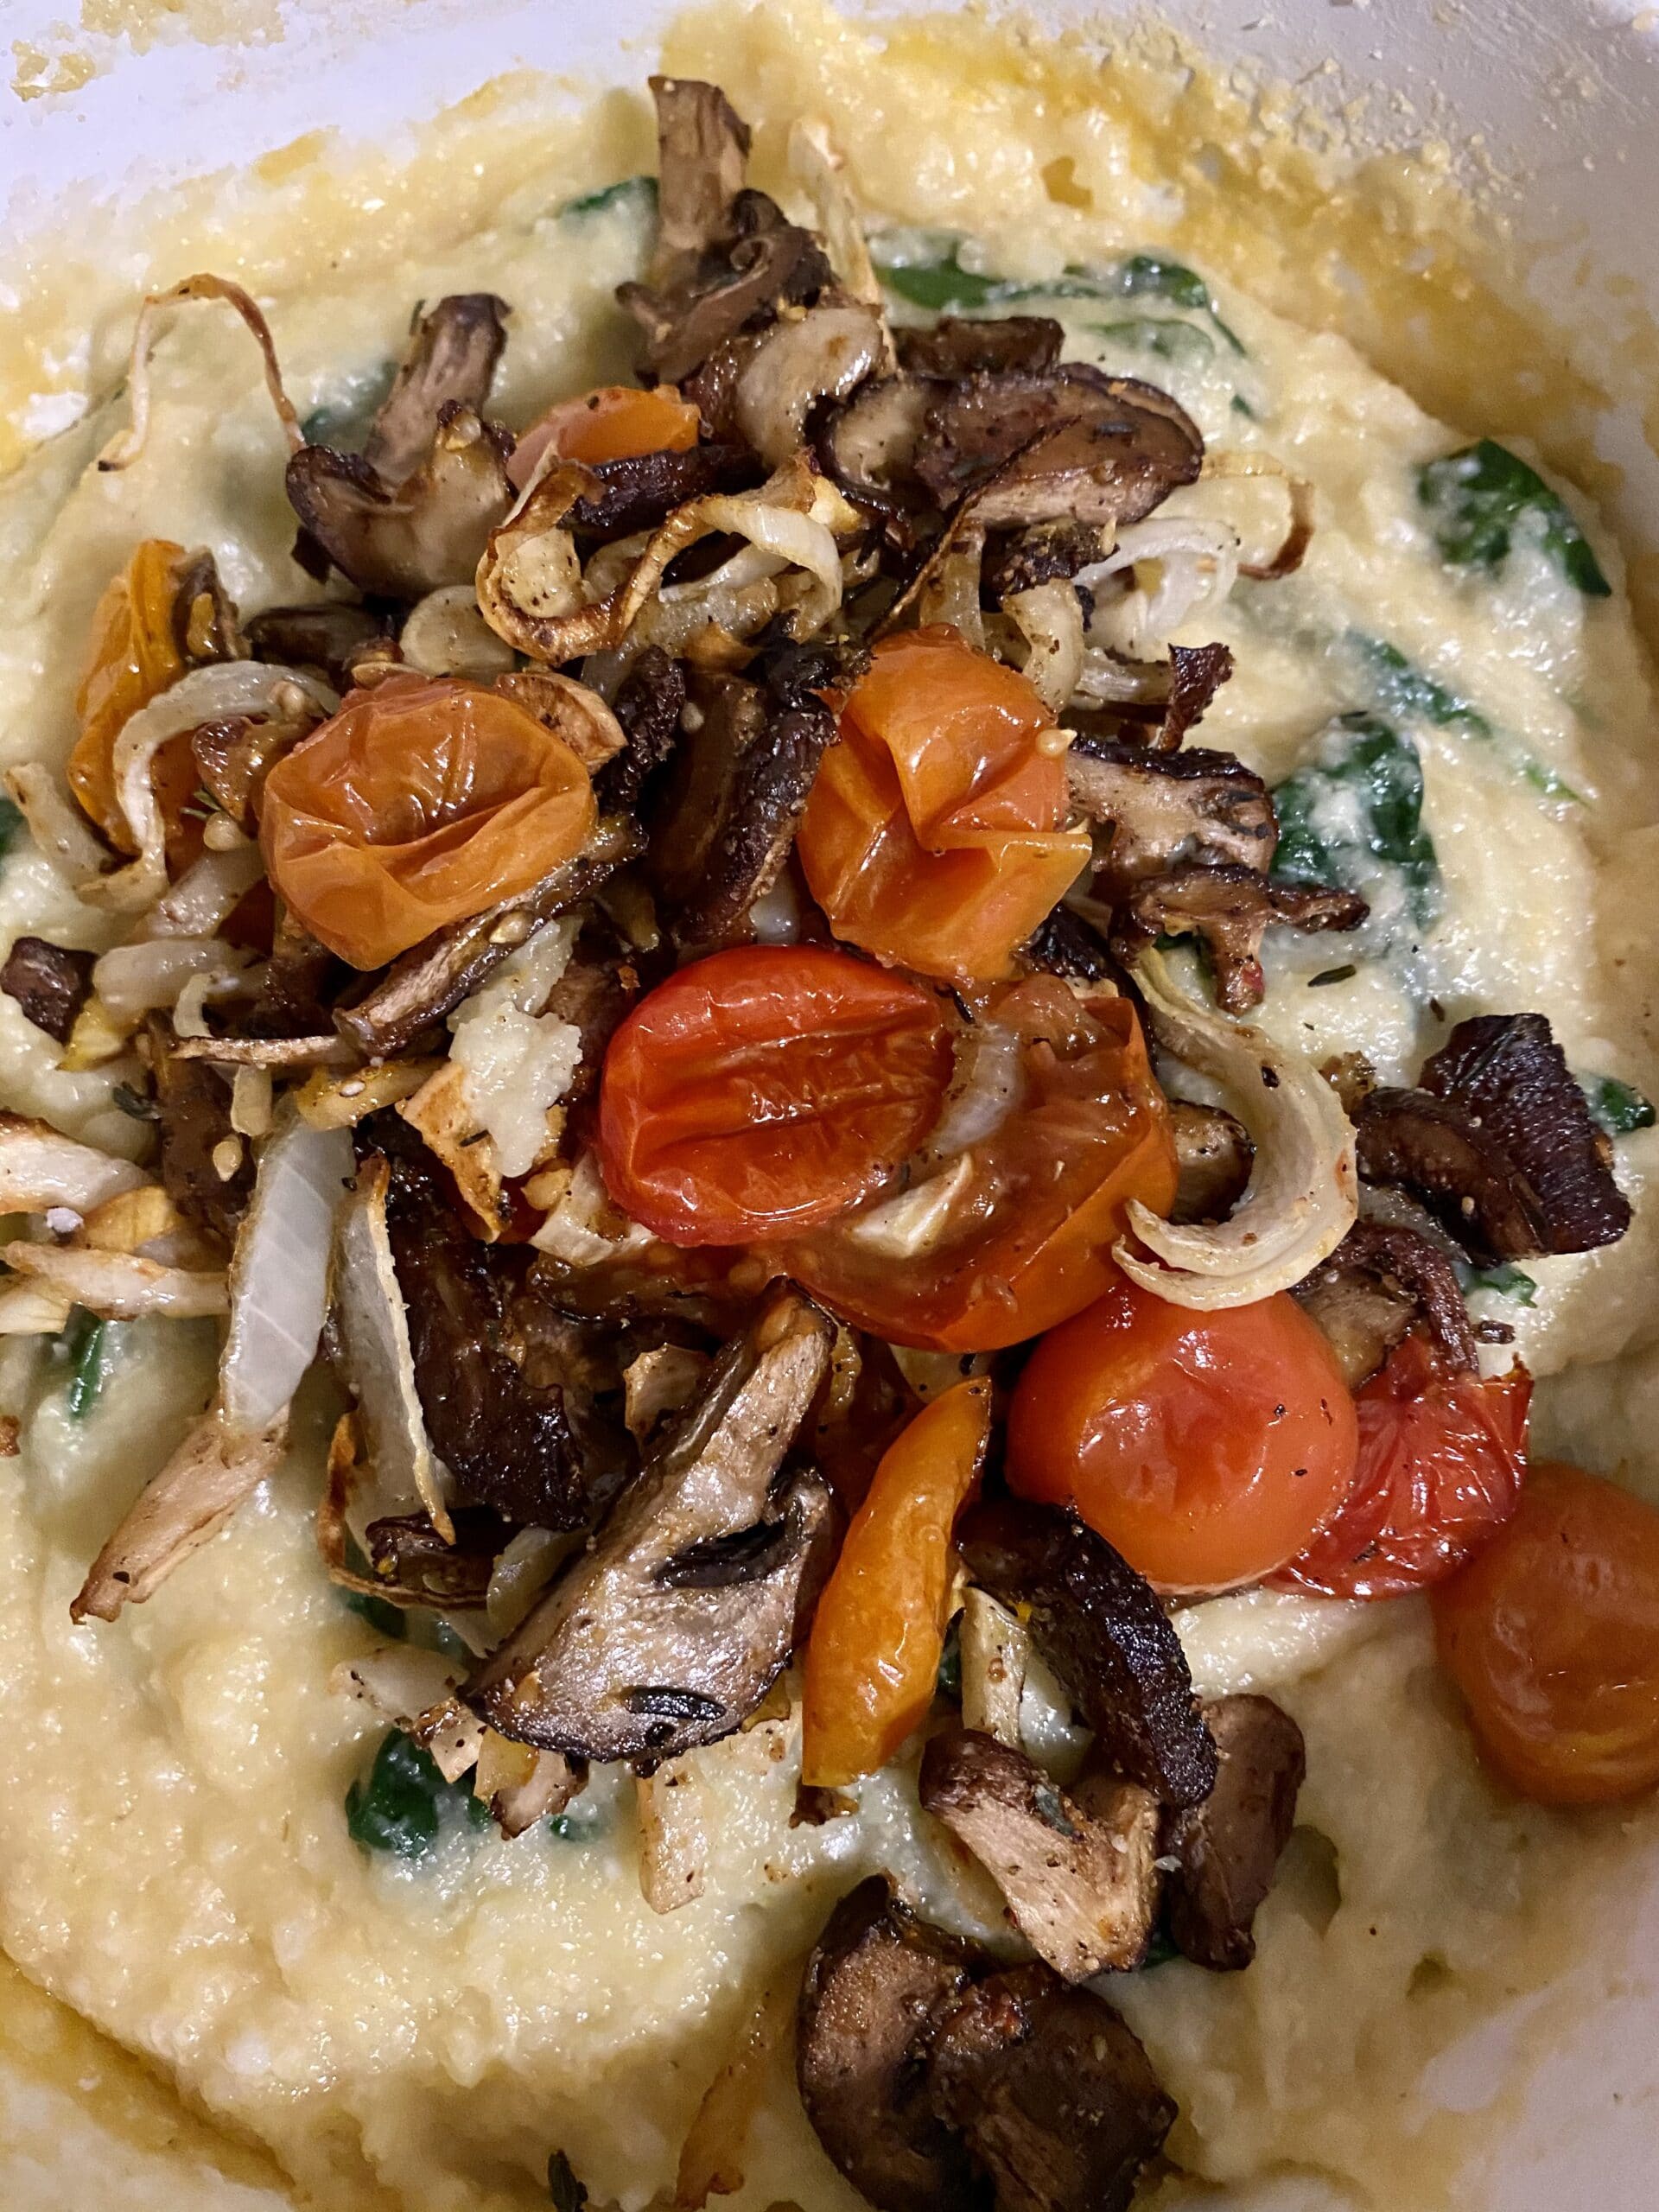 Creamy Bake Polenta with Mushrooms, Tomatoes and Spinach